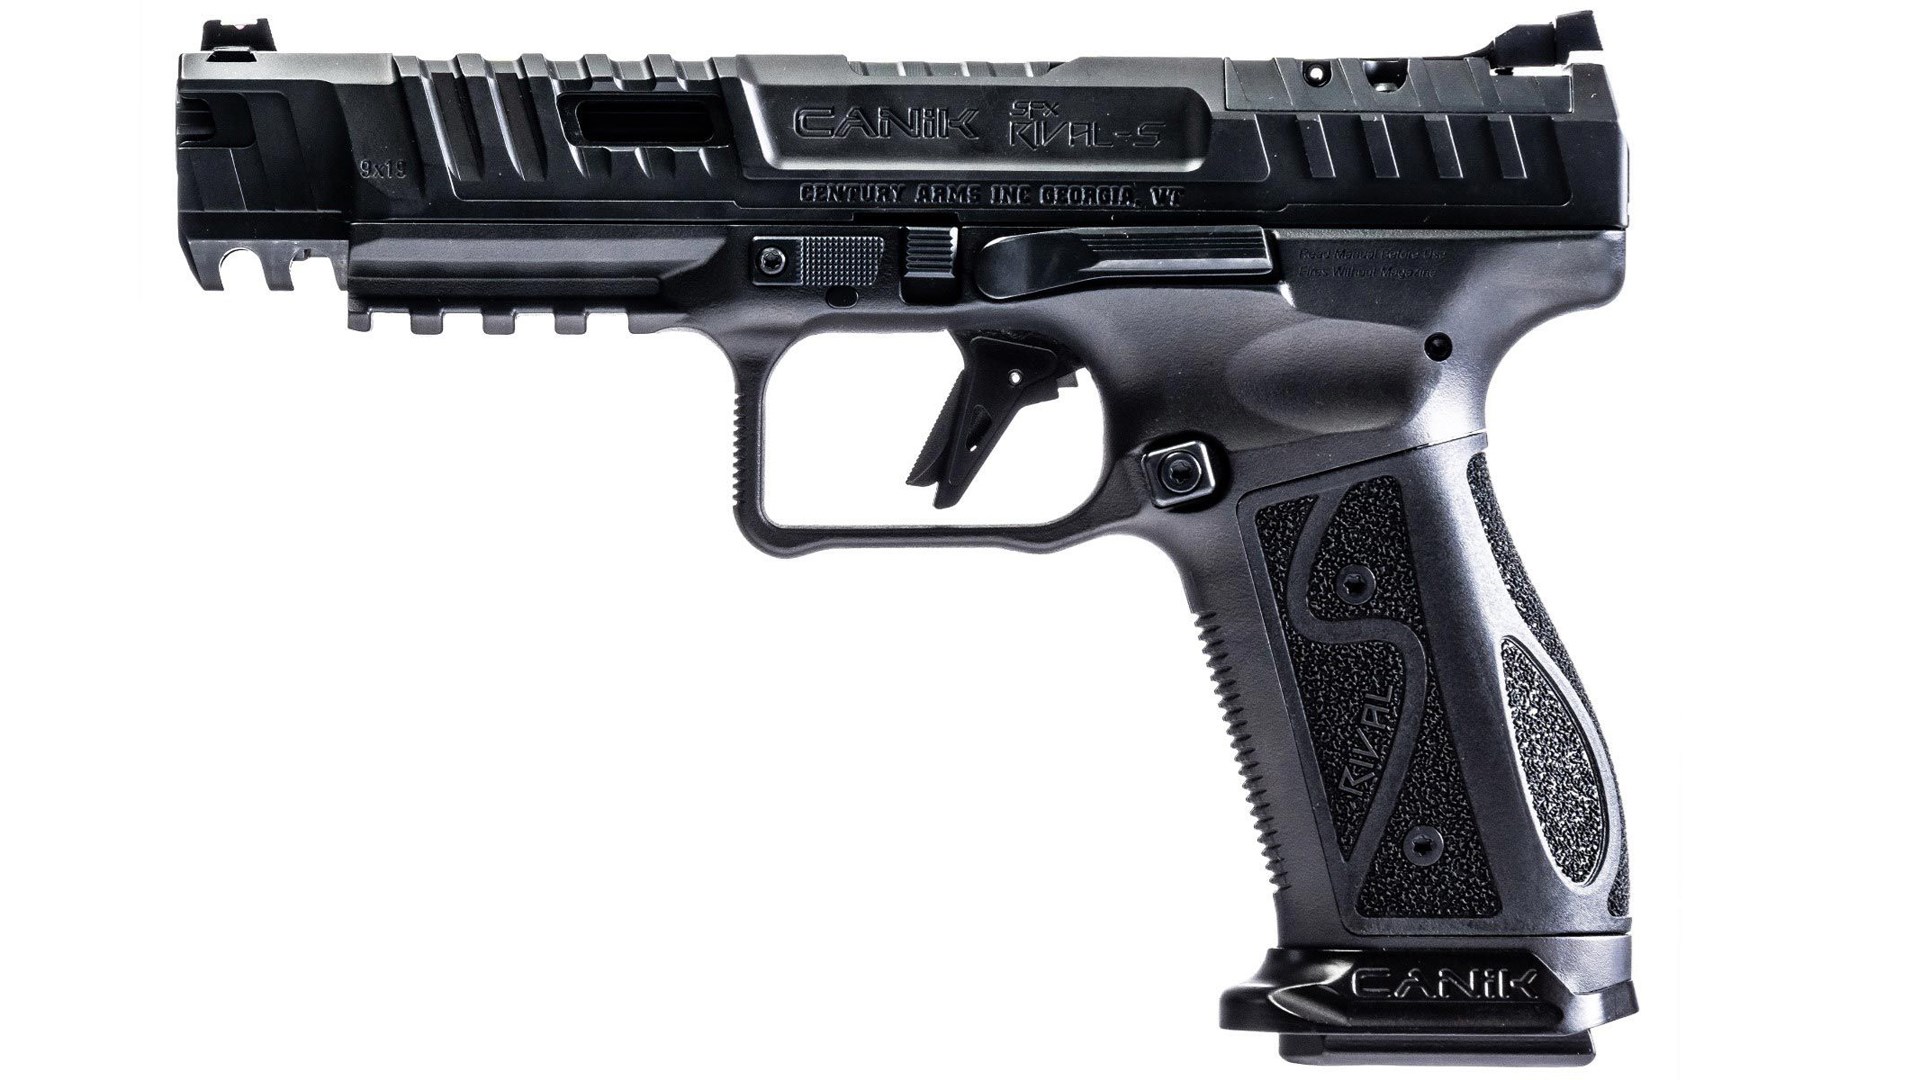 Right side of the all-black Canik SFx Rival-S pistol.